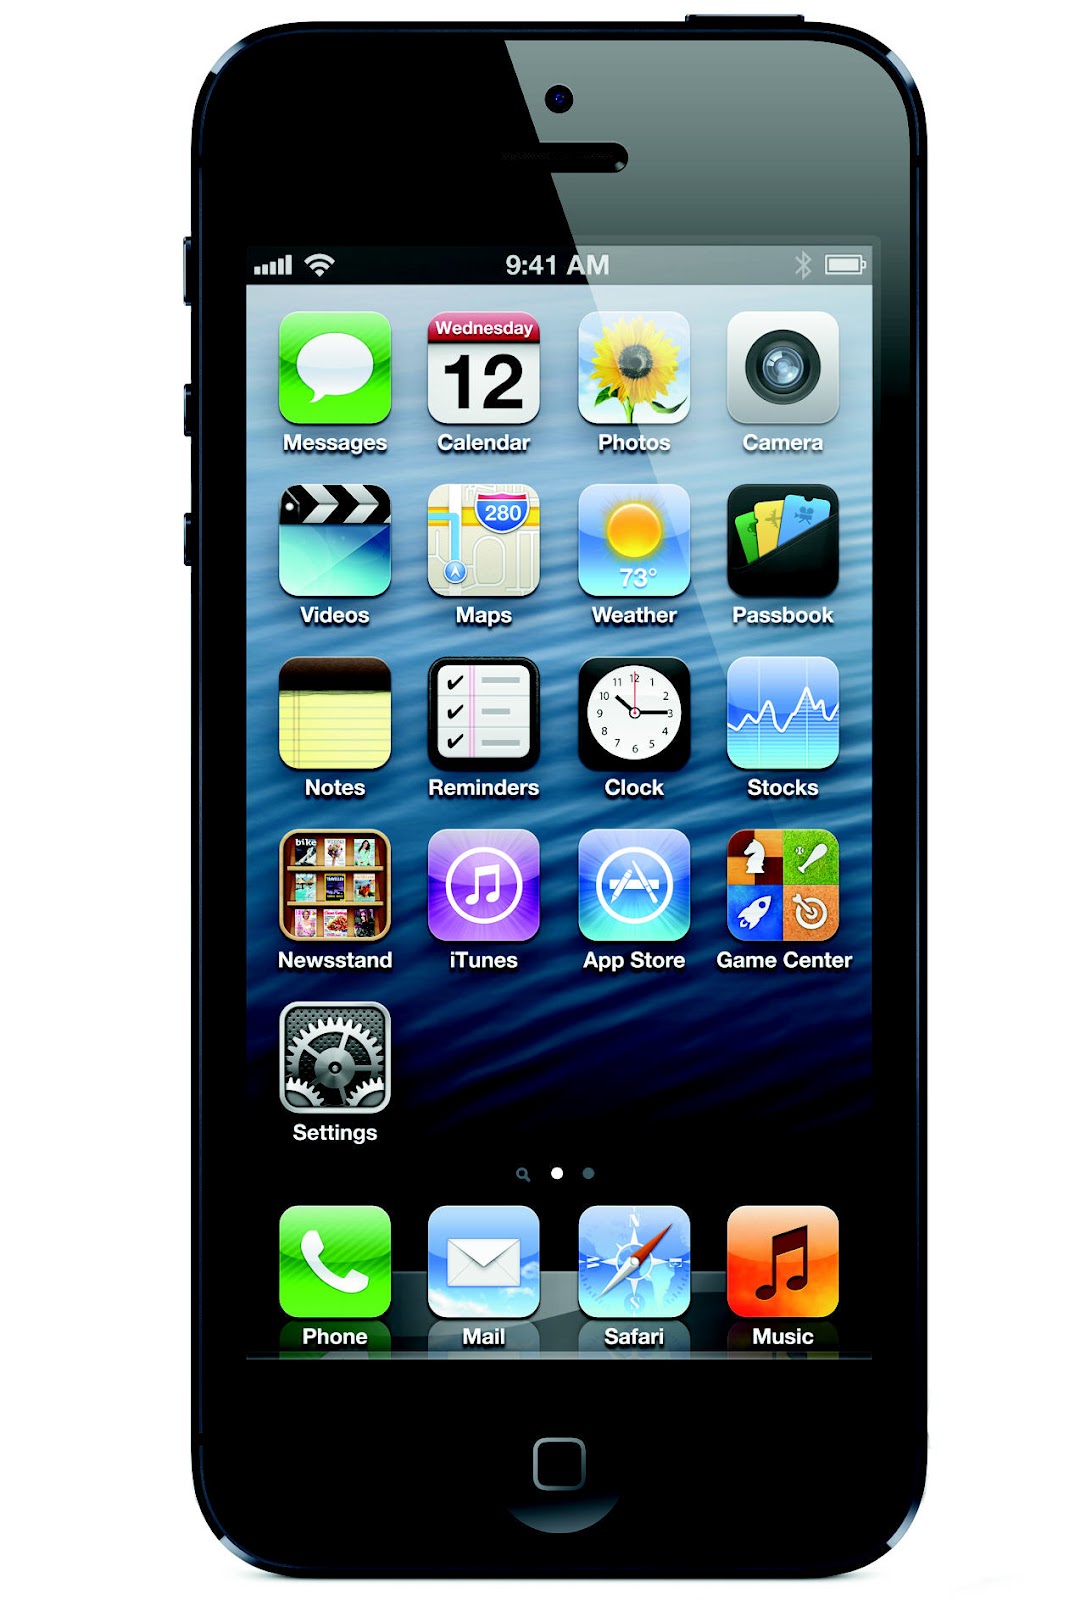 iphone 5 apple s next generation smartphone iphone 5 was officially ...